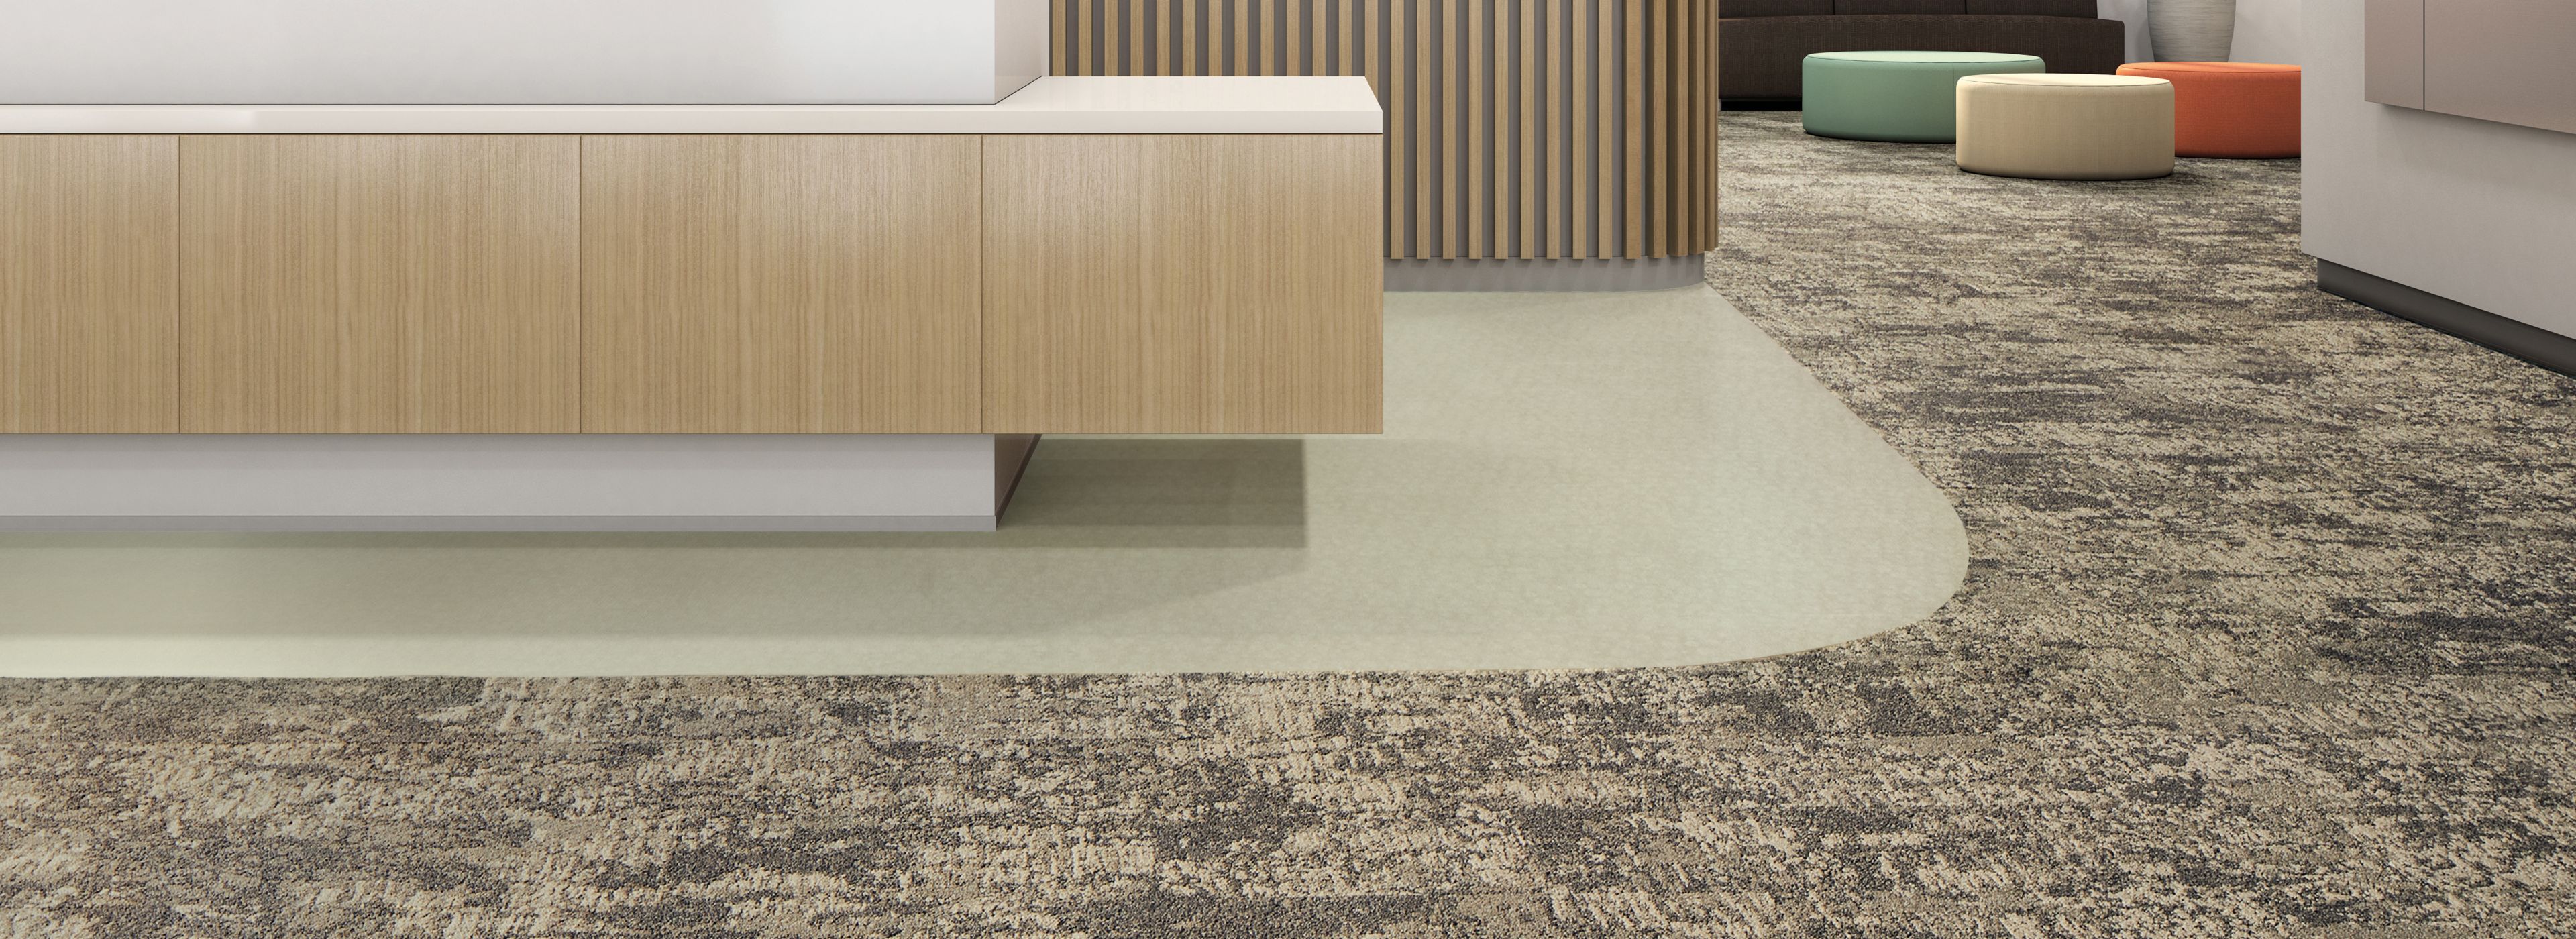 Interface Cactus Makes Perfect LVT and Just Deserts plank carpet tile in reception and waiting area image number 1